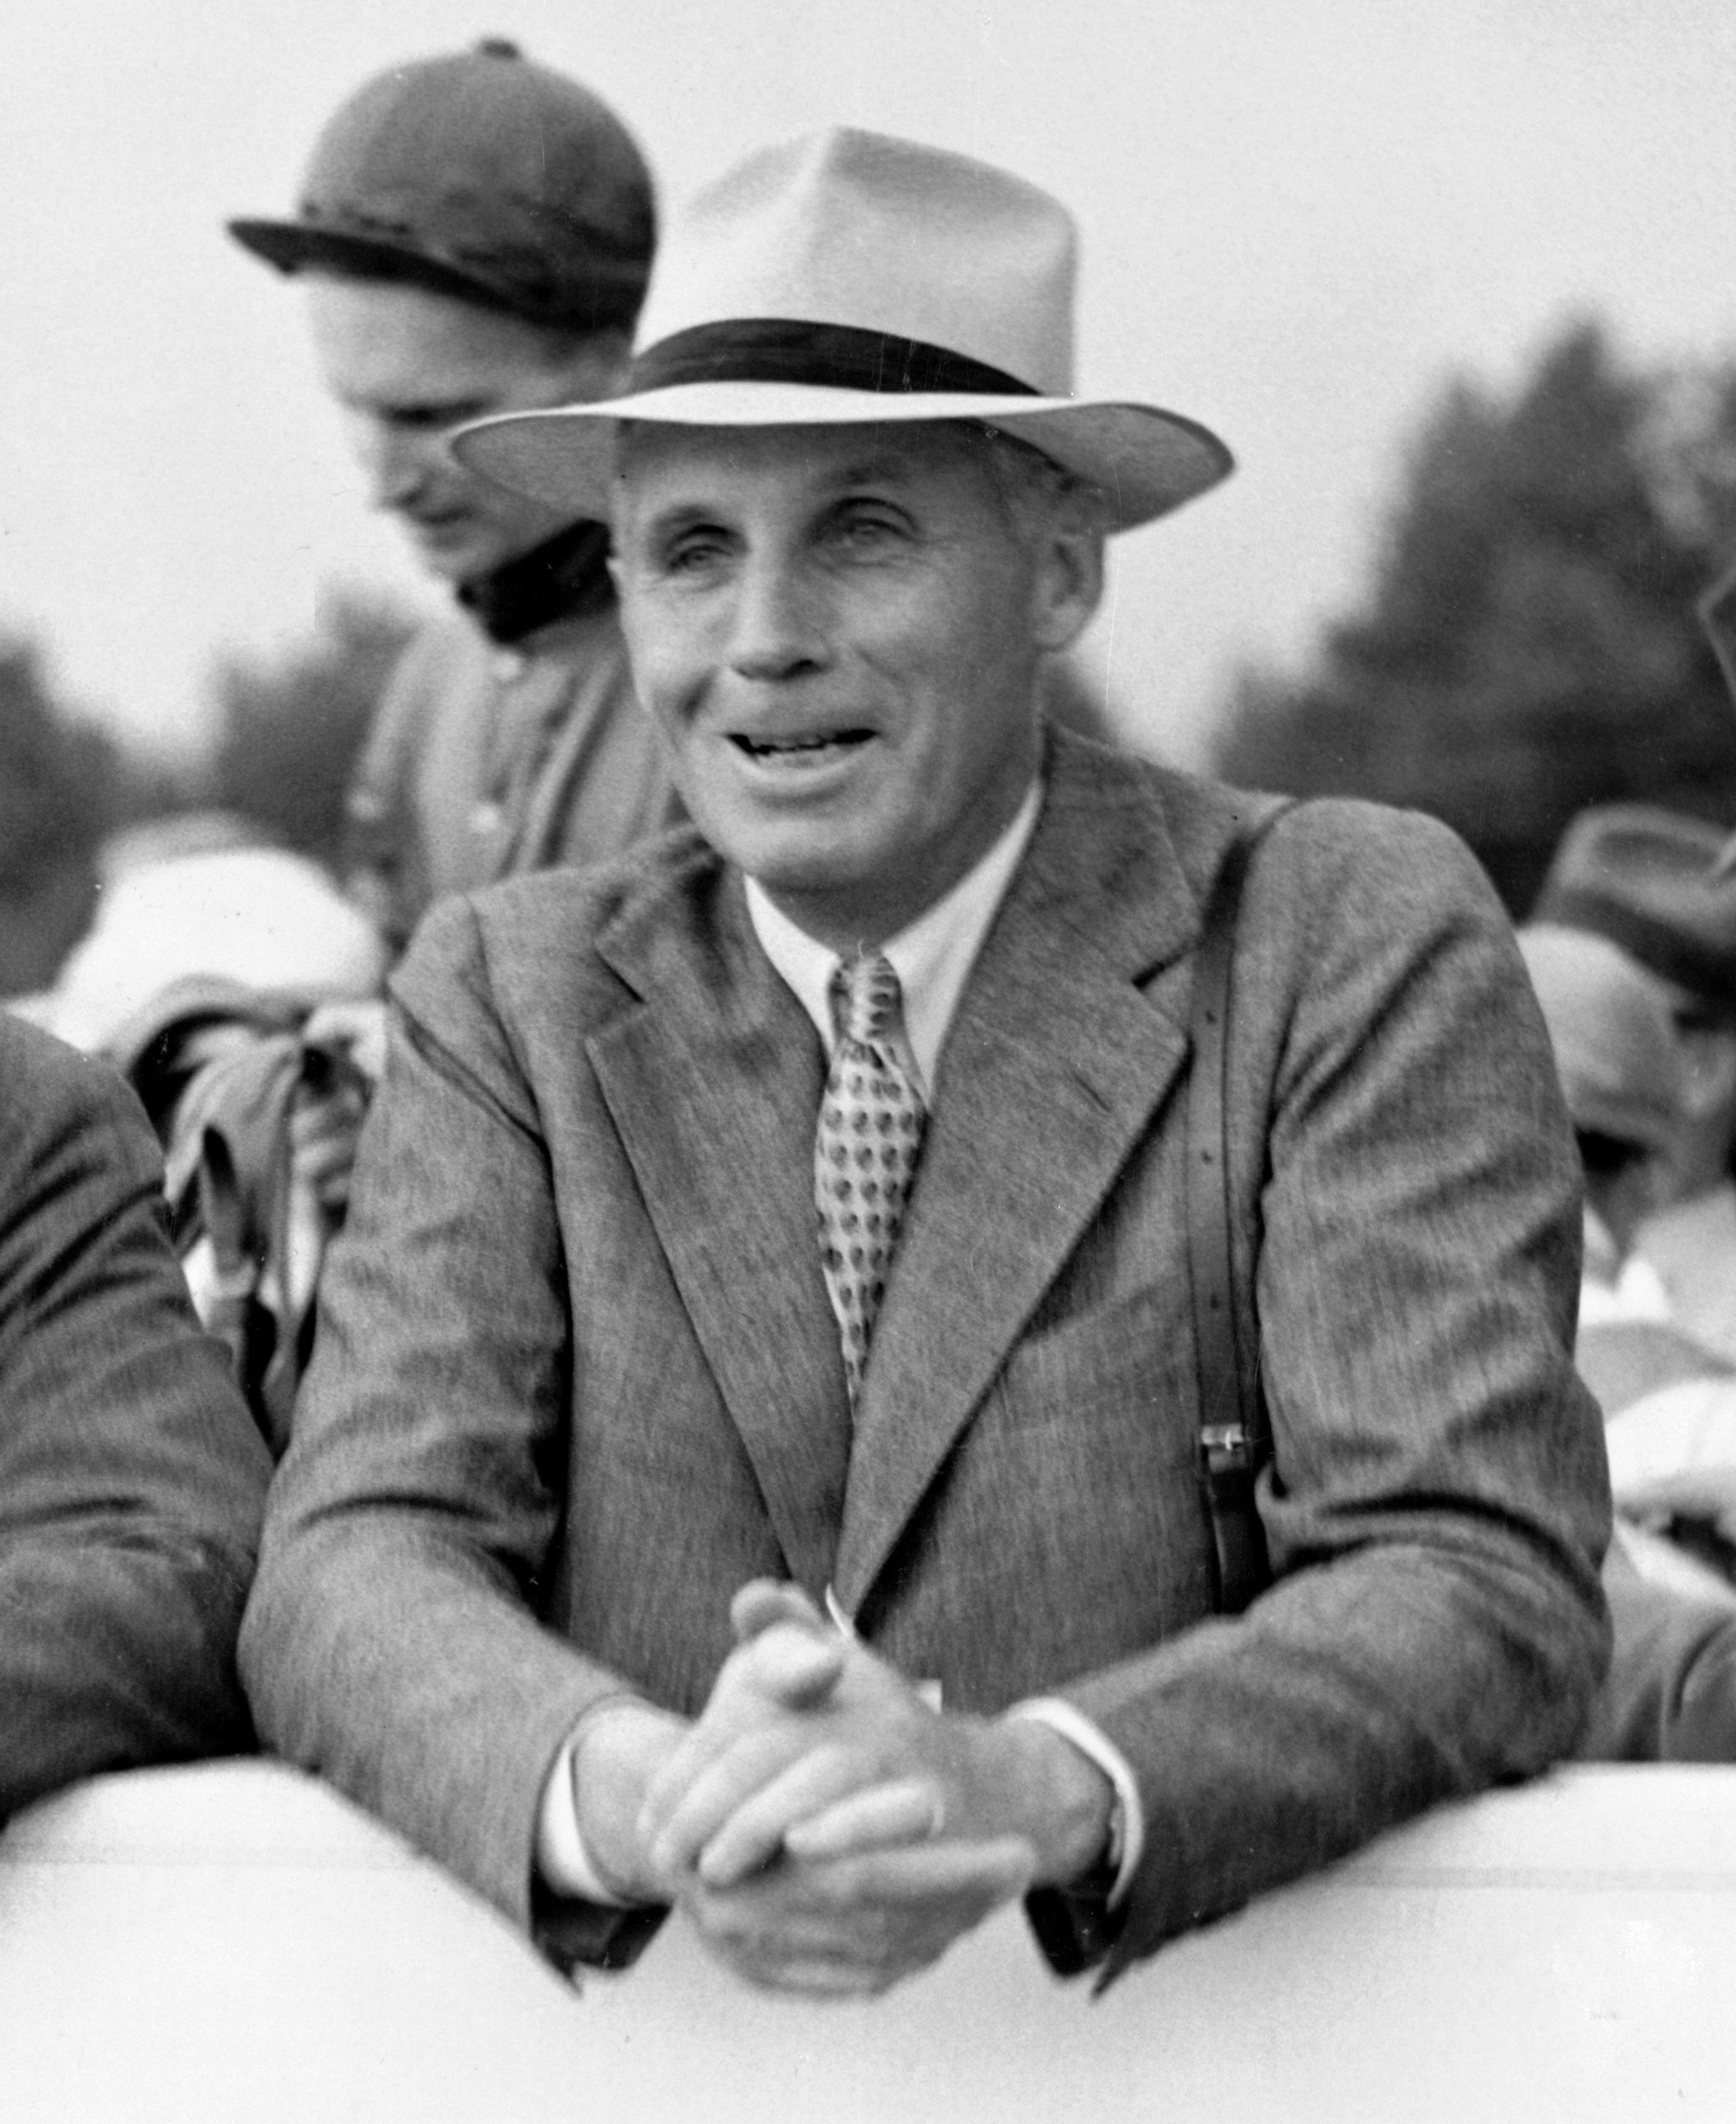 George D. Widener, Jr at the White March Races, September 1941 (Keeneland Library Morgan Collection)